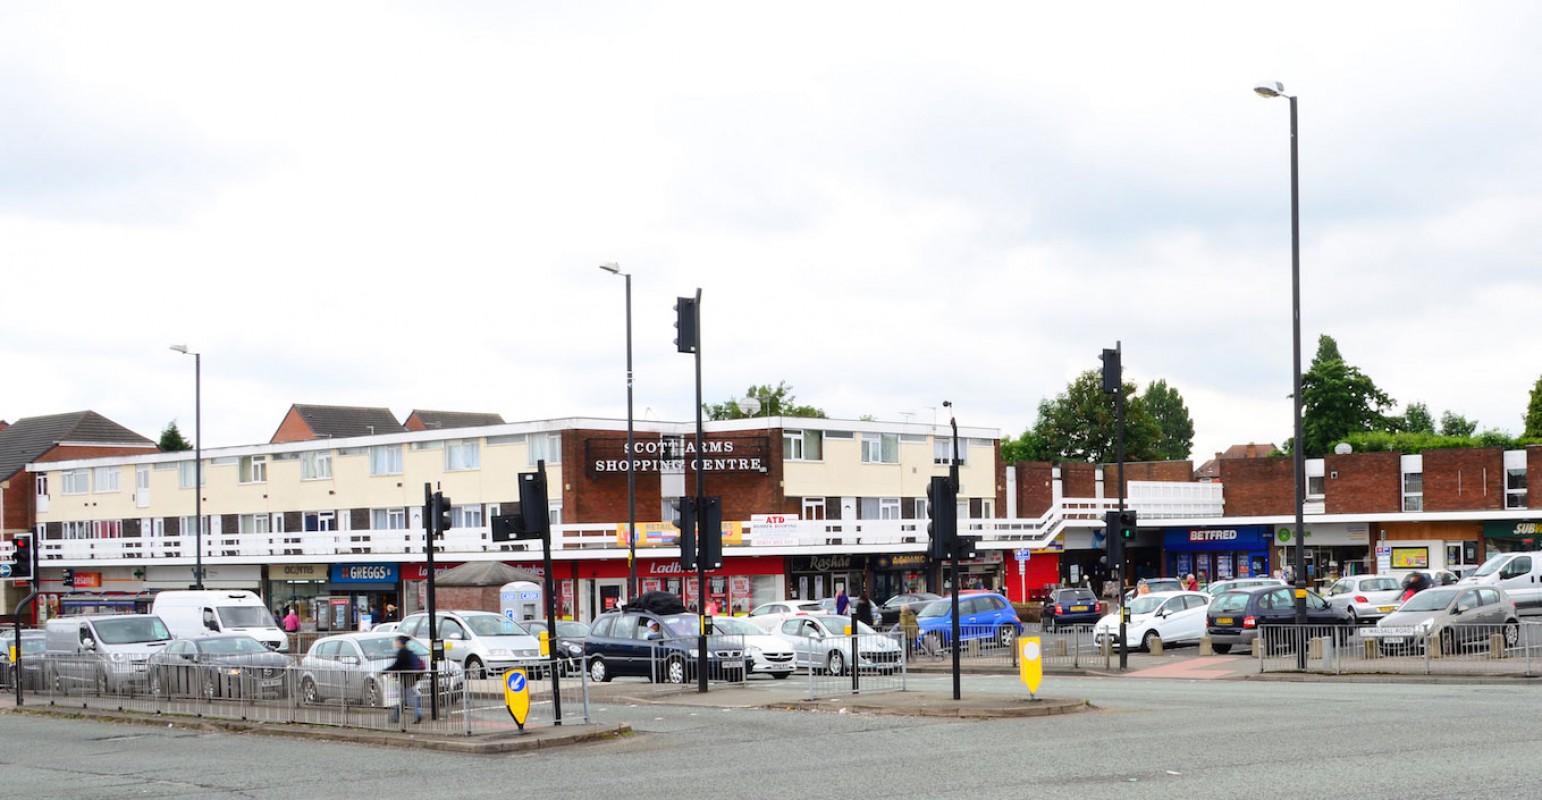 New Image for SCOTT ARMS SHOPPING CENTRE WELCOMES THREE NEW TENANTS